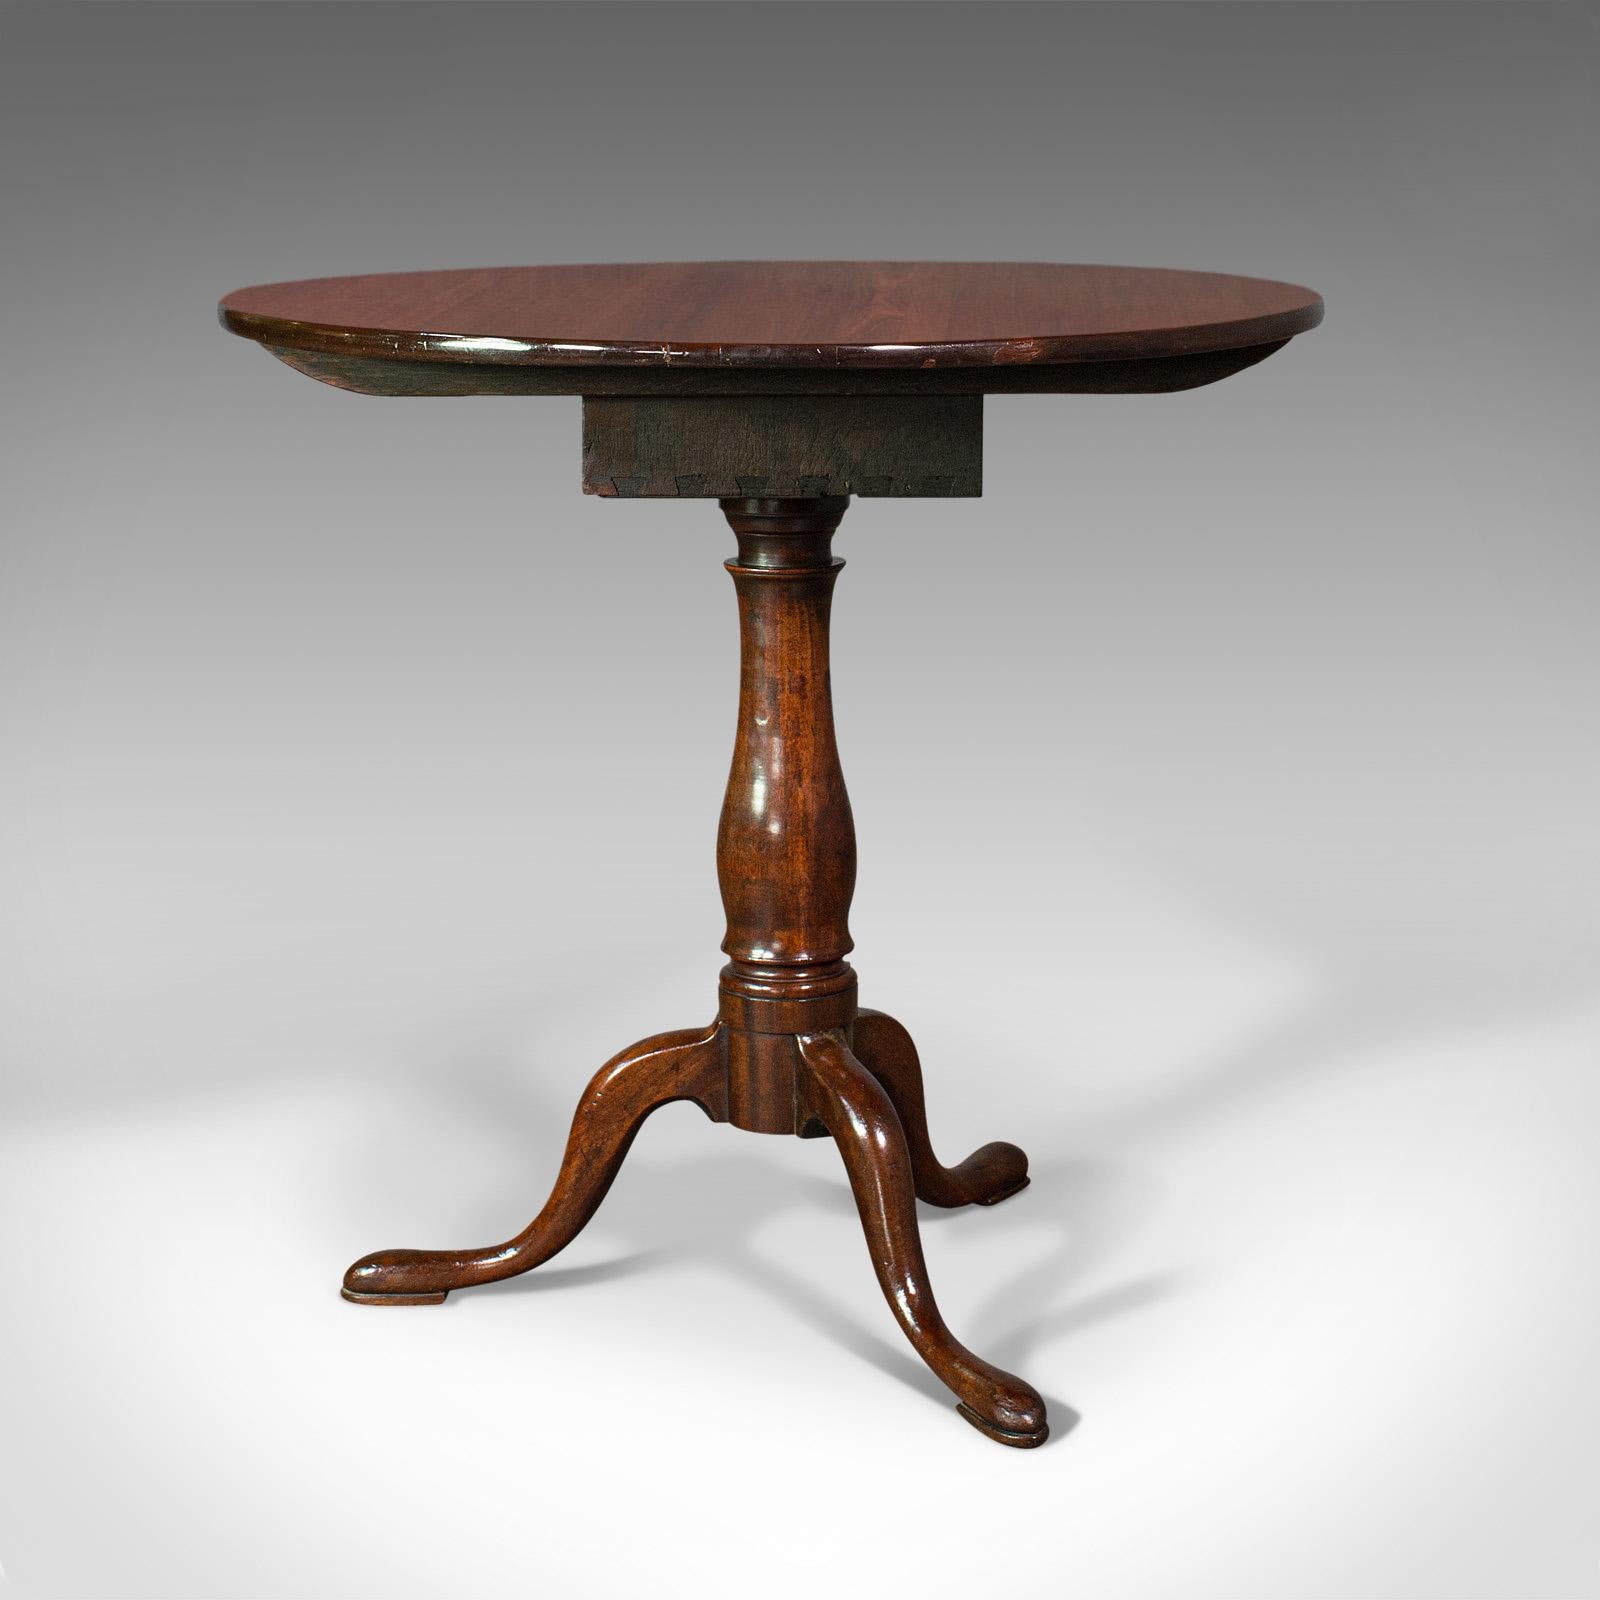 Antique Tilt Top Table, English, Mahogany, Occasional, Wine, Georgian, C.1780 In Good Condition For Sale In Hele, Devon, GB